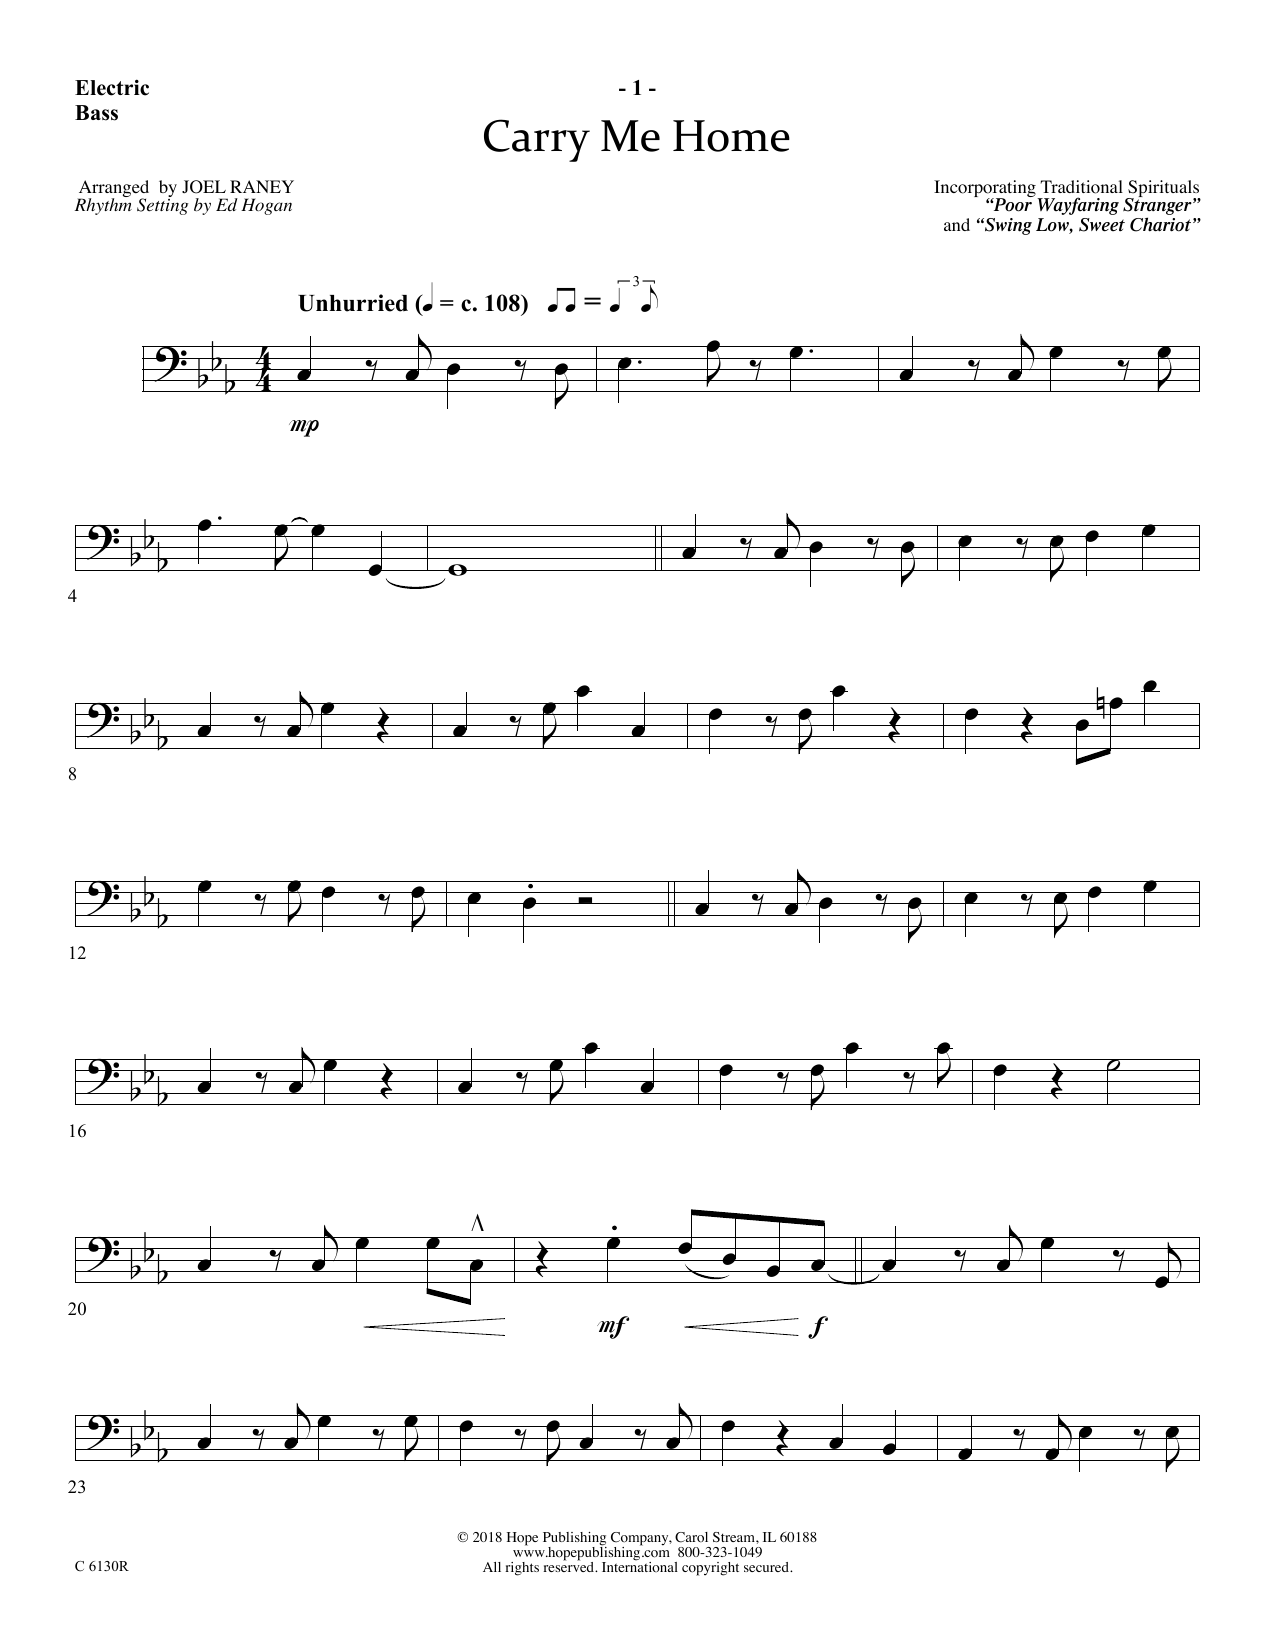 Download Joel Raney Carry Me Home - Electric Bass Sheet Music